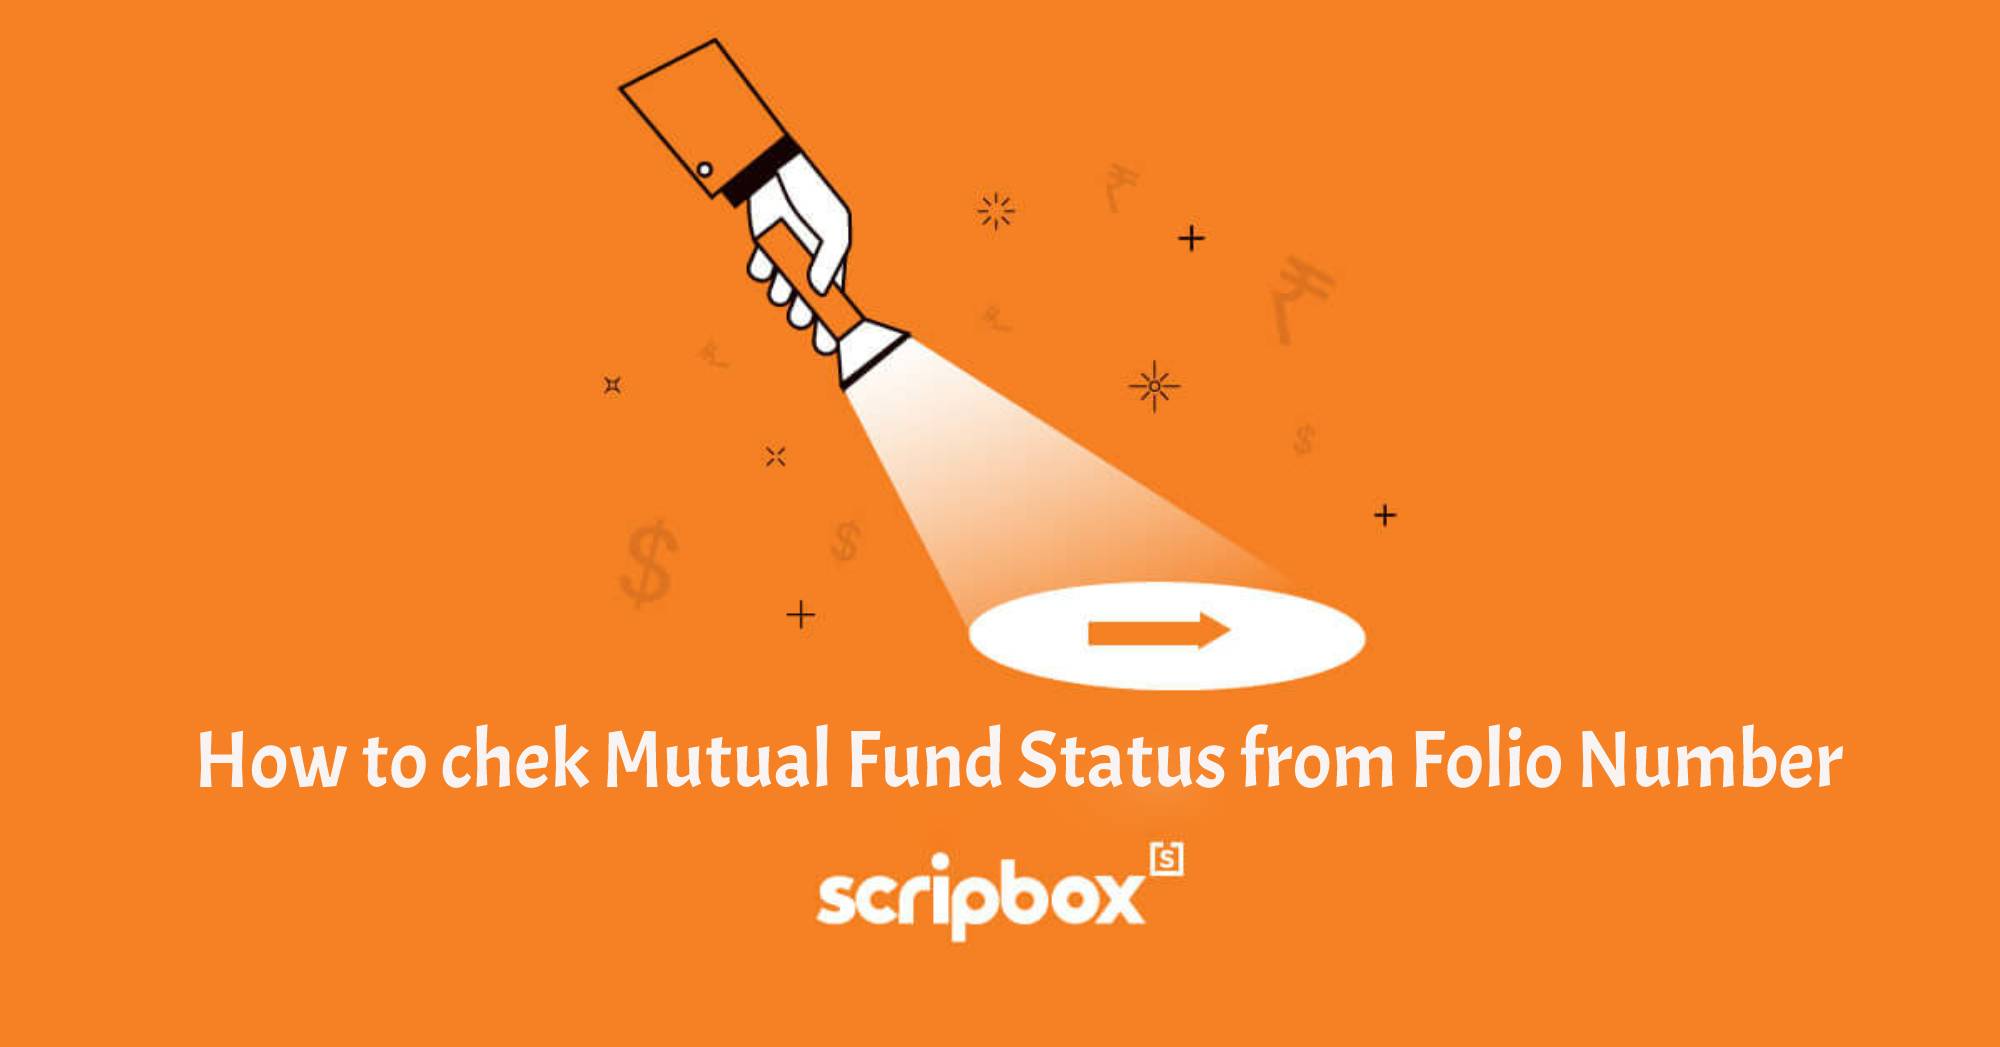 How-to-chek-Mutual-Fund-Status-from-Folio-Number